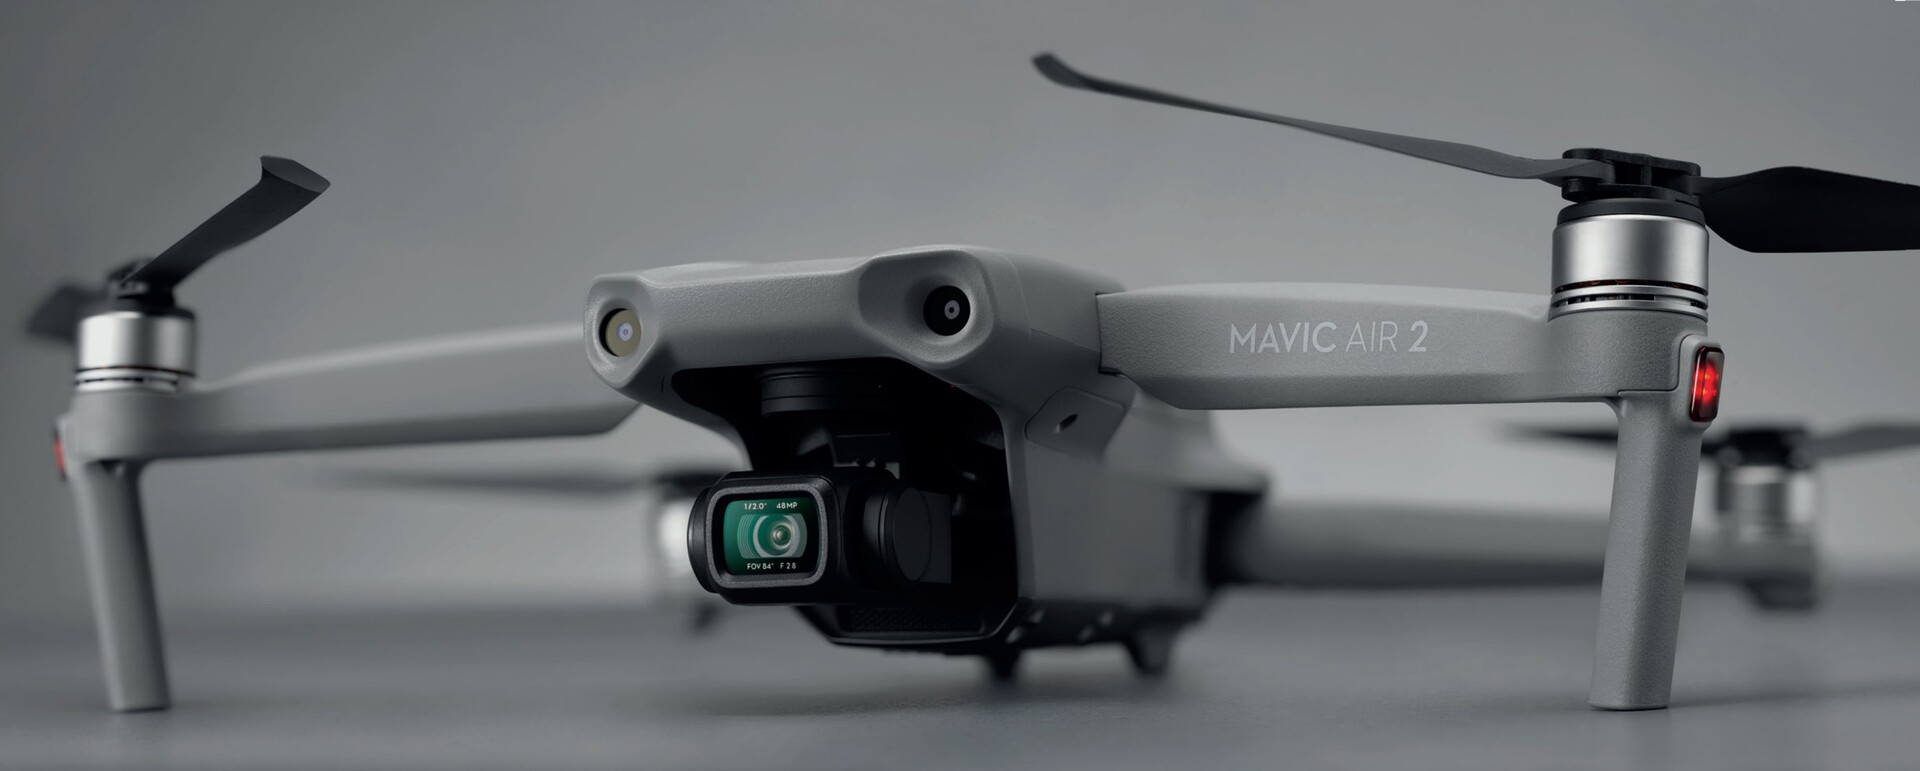 Dji Mavic Air 2 Official Images Of The New Drone And Accessories Leak Ahead Of Imminent Release Notebookcheck Net News